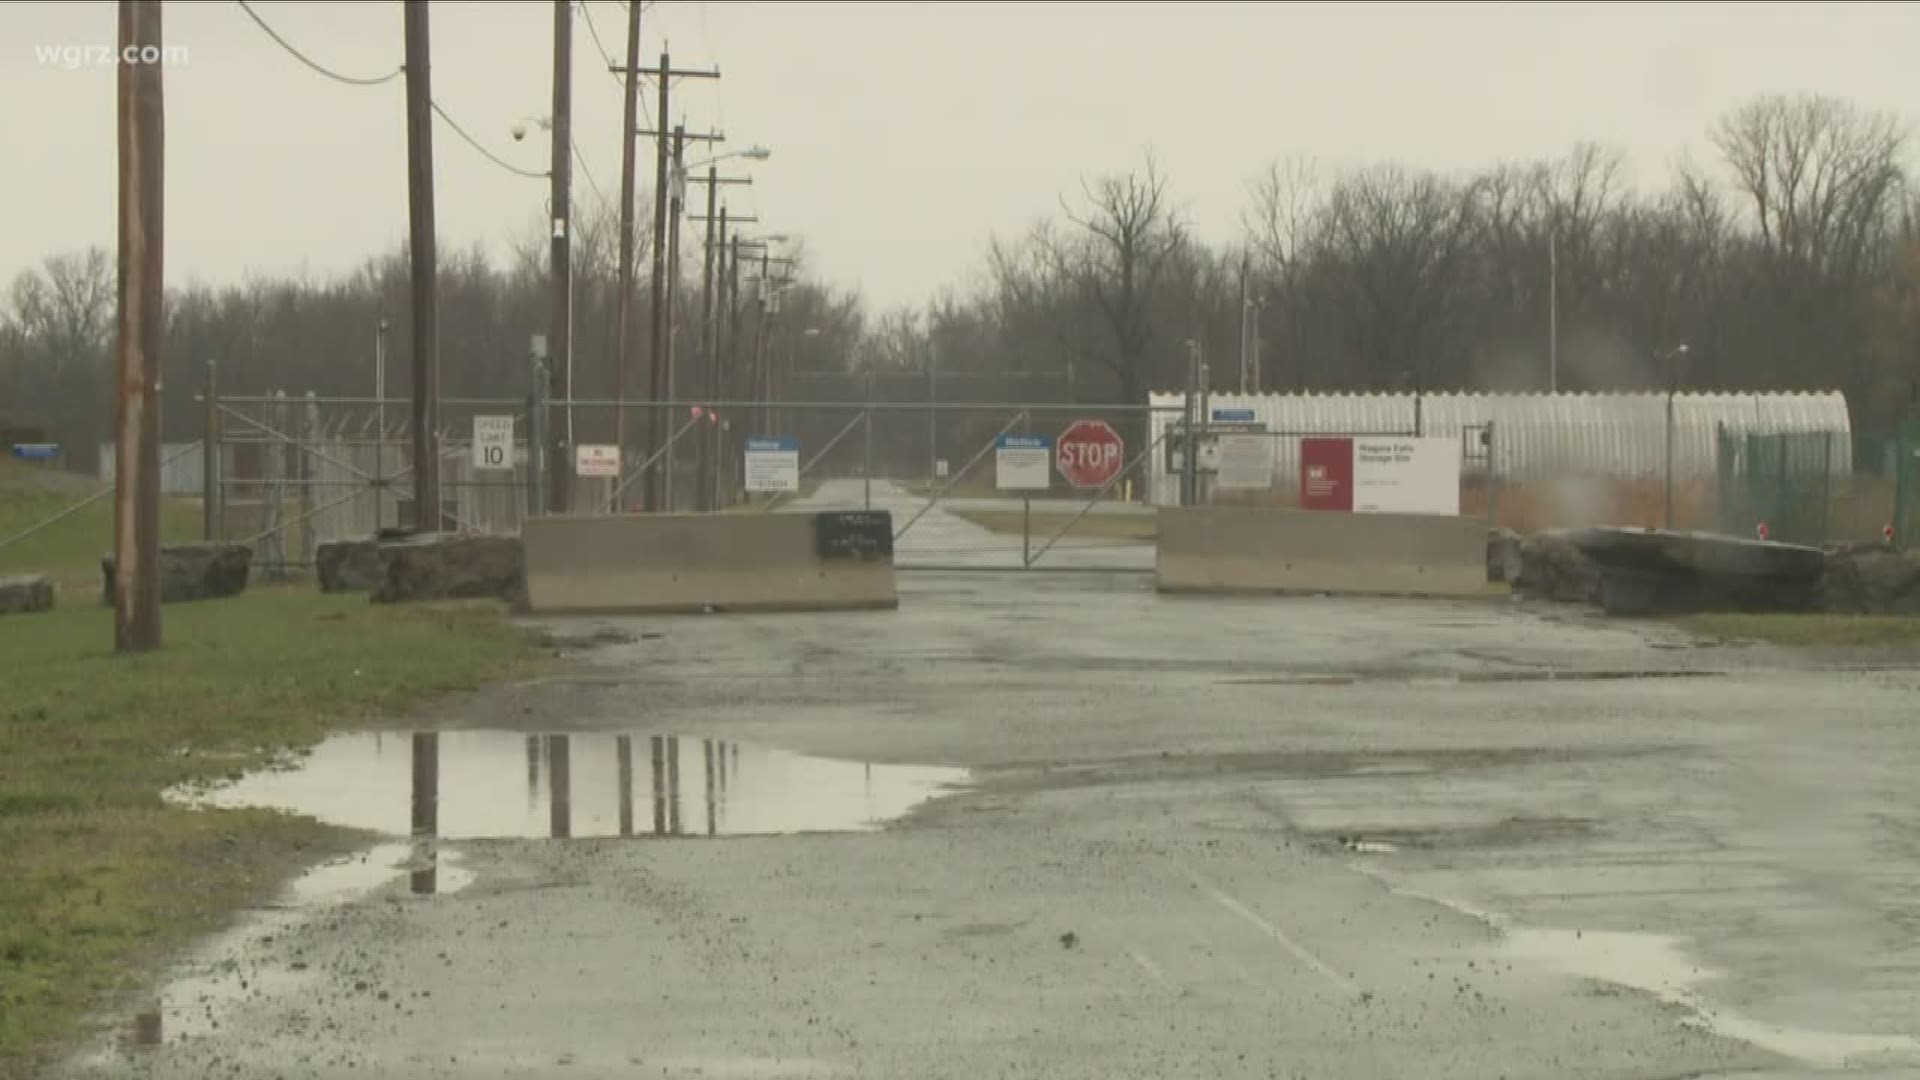 New plans to remove Niagara Co. nuclear waste